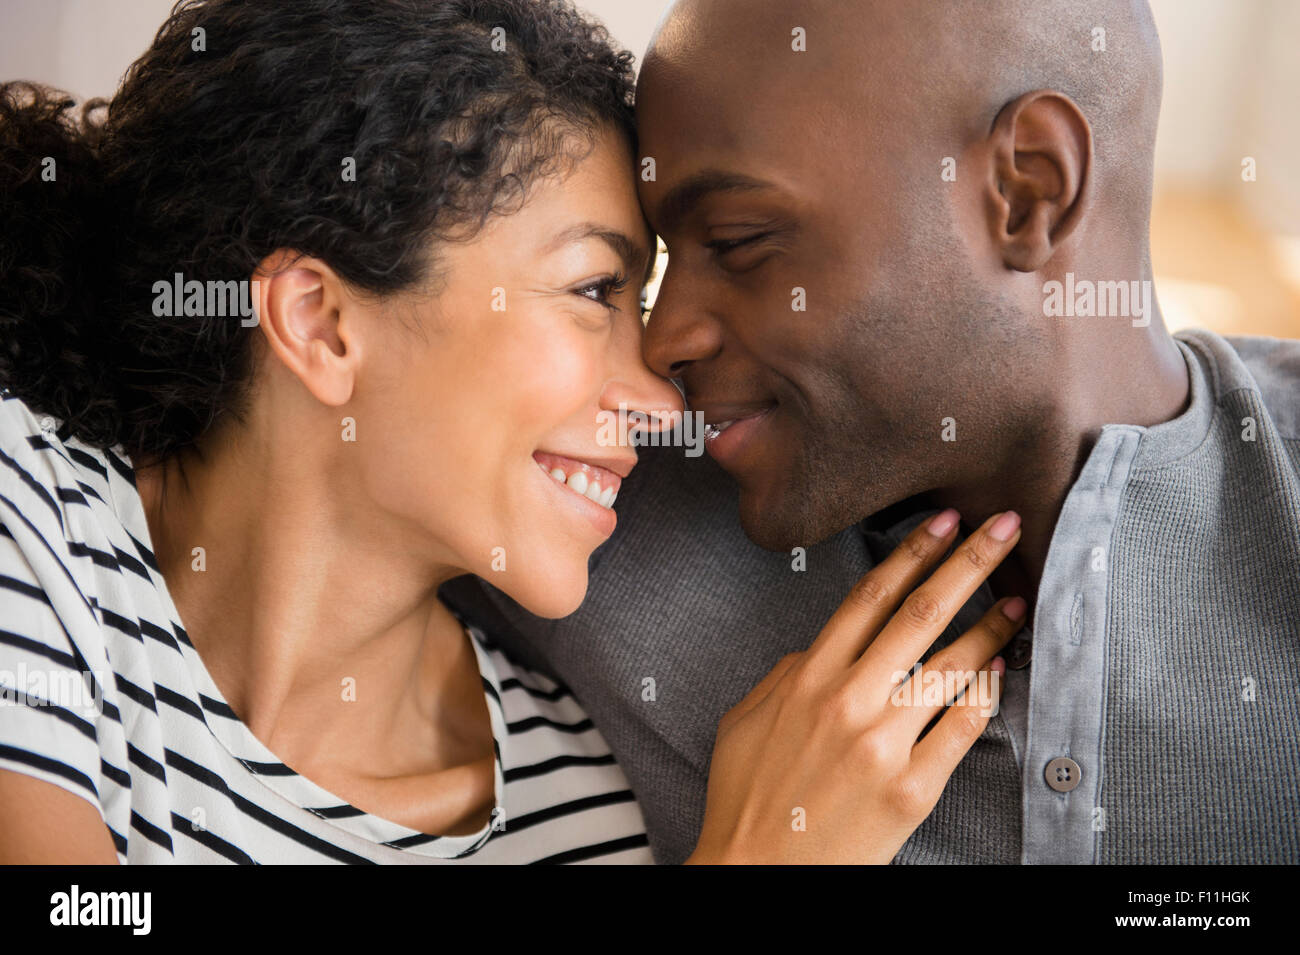 Close up of smiling woman rubbing noses Banque D'Images